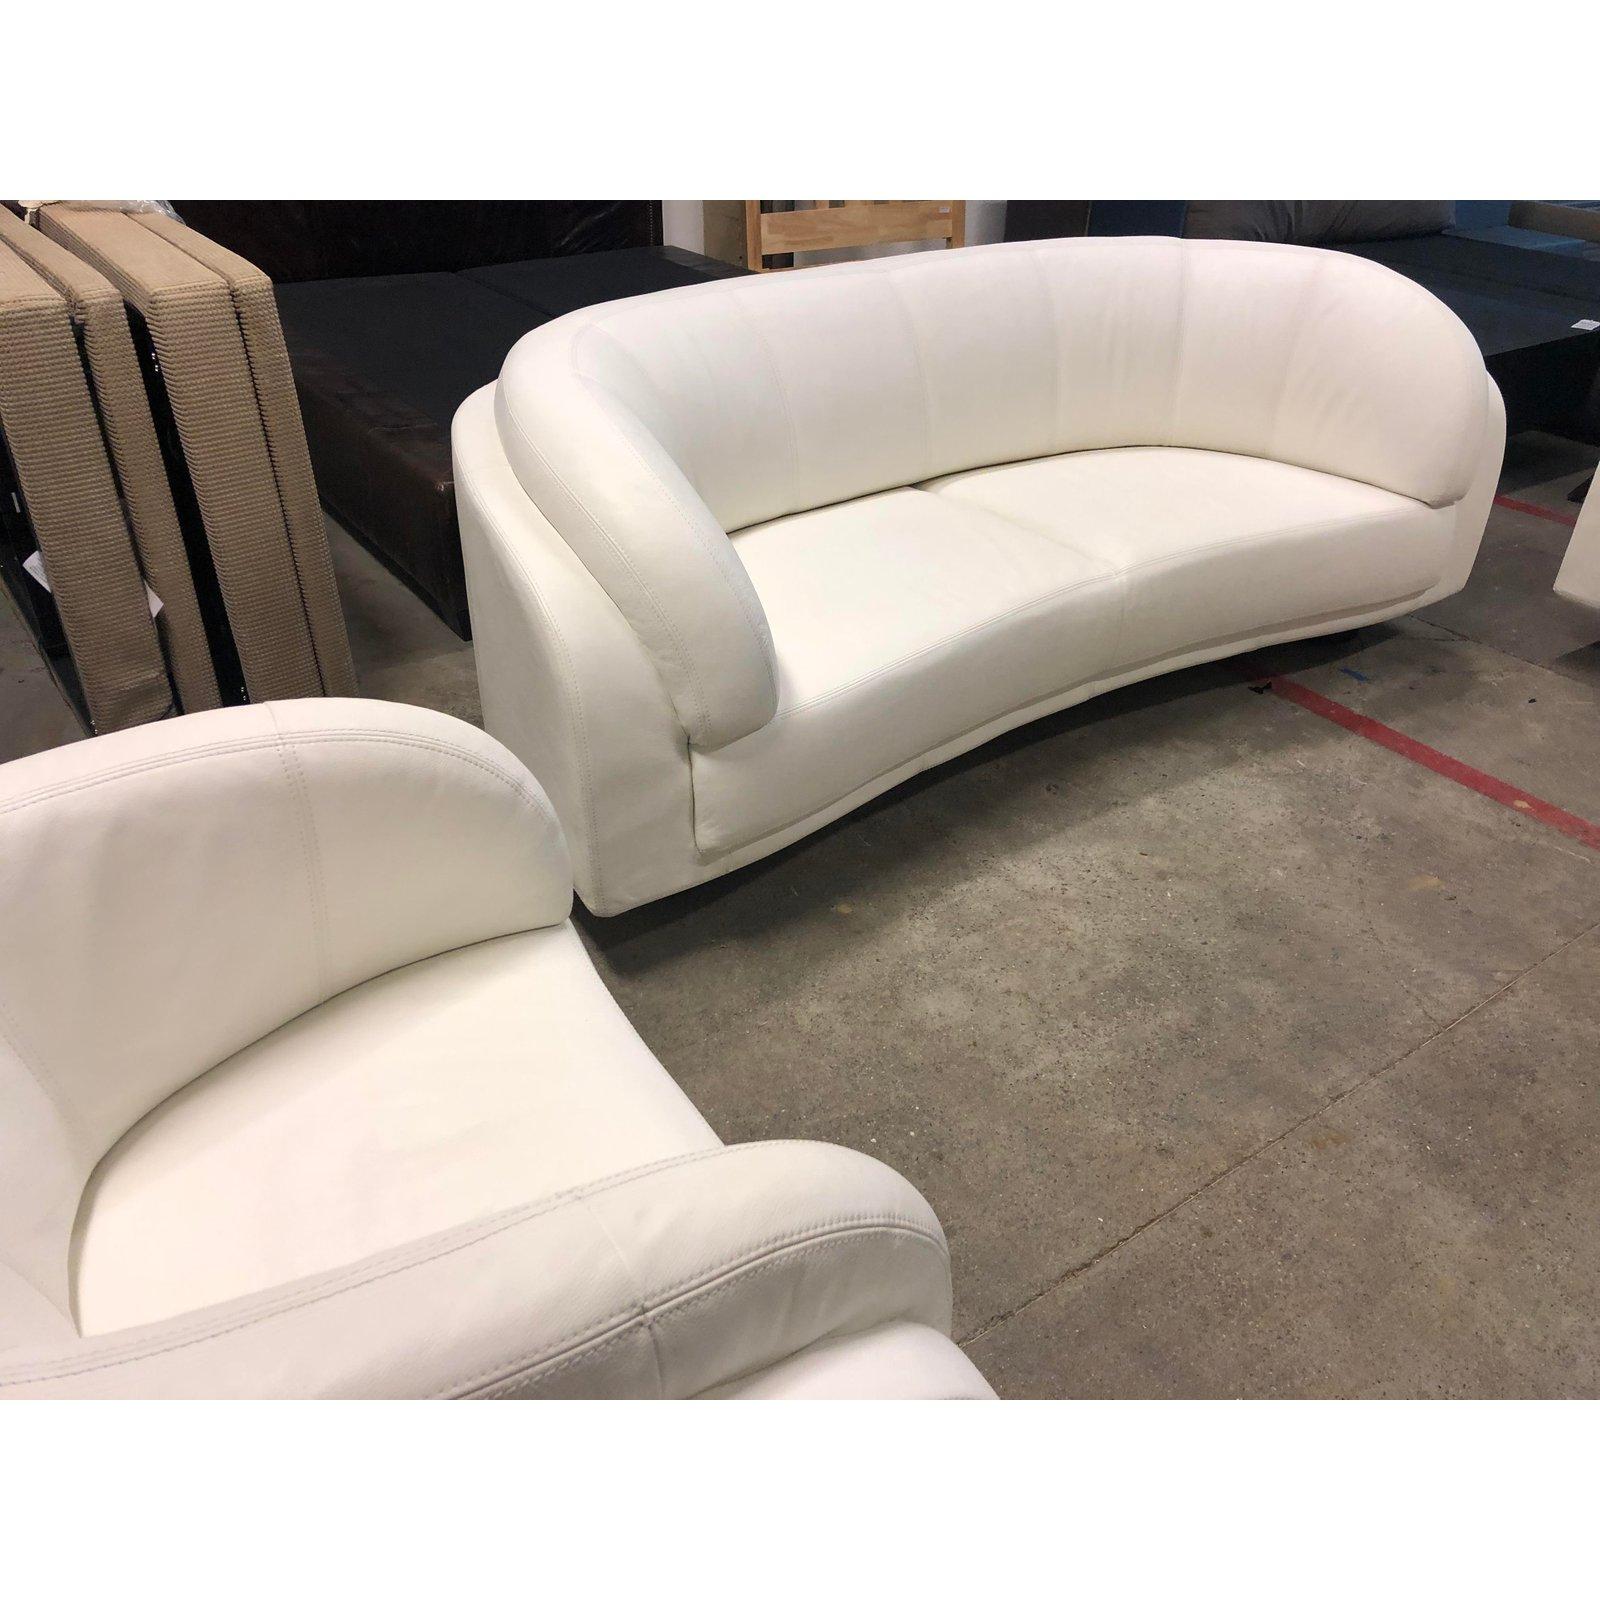 W.Schillig Arabesque Sofa and Pair of Swivel Chairs In Good Condition For Sale In San Francisco, CA